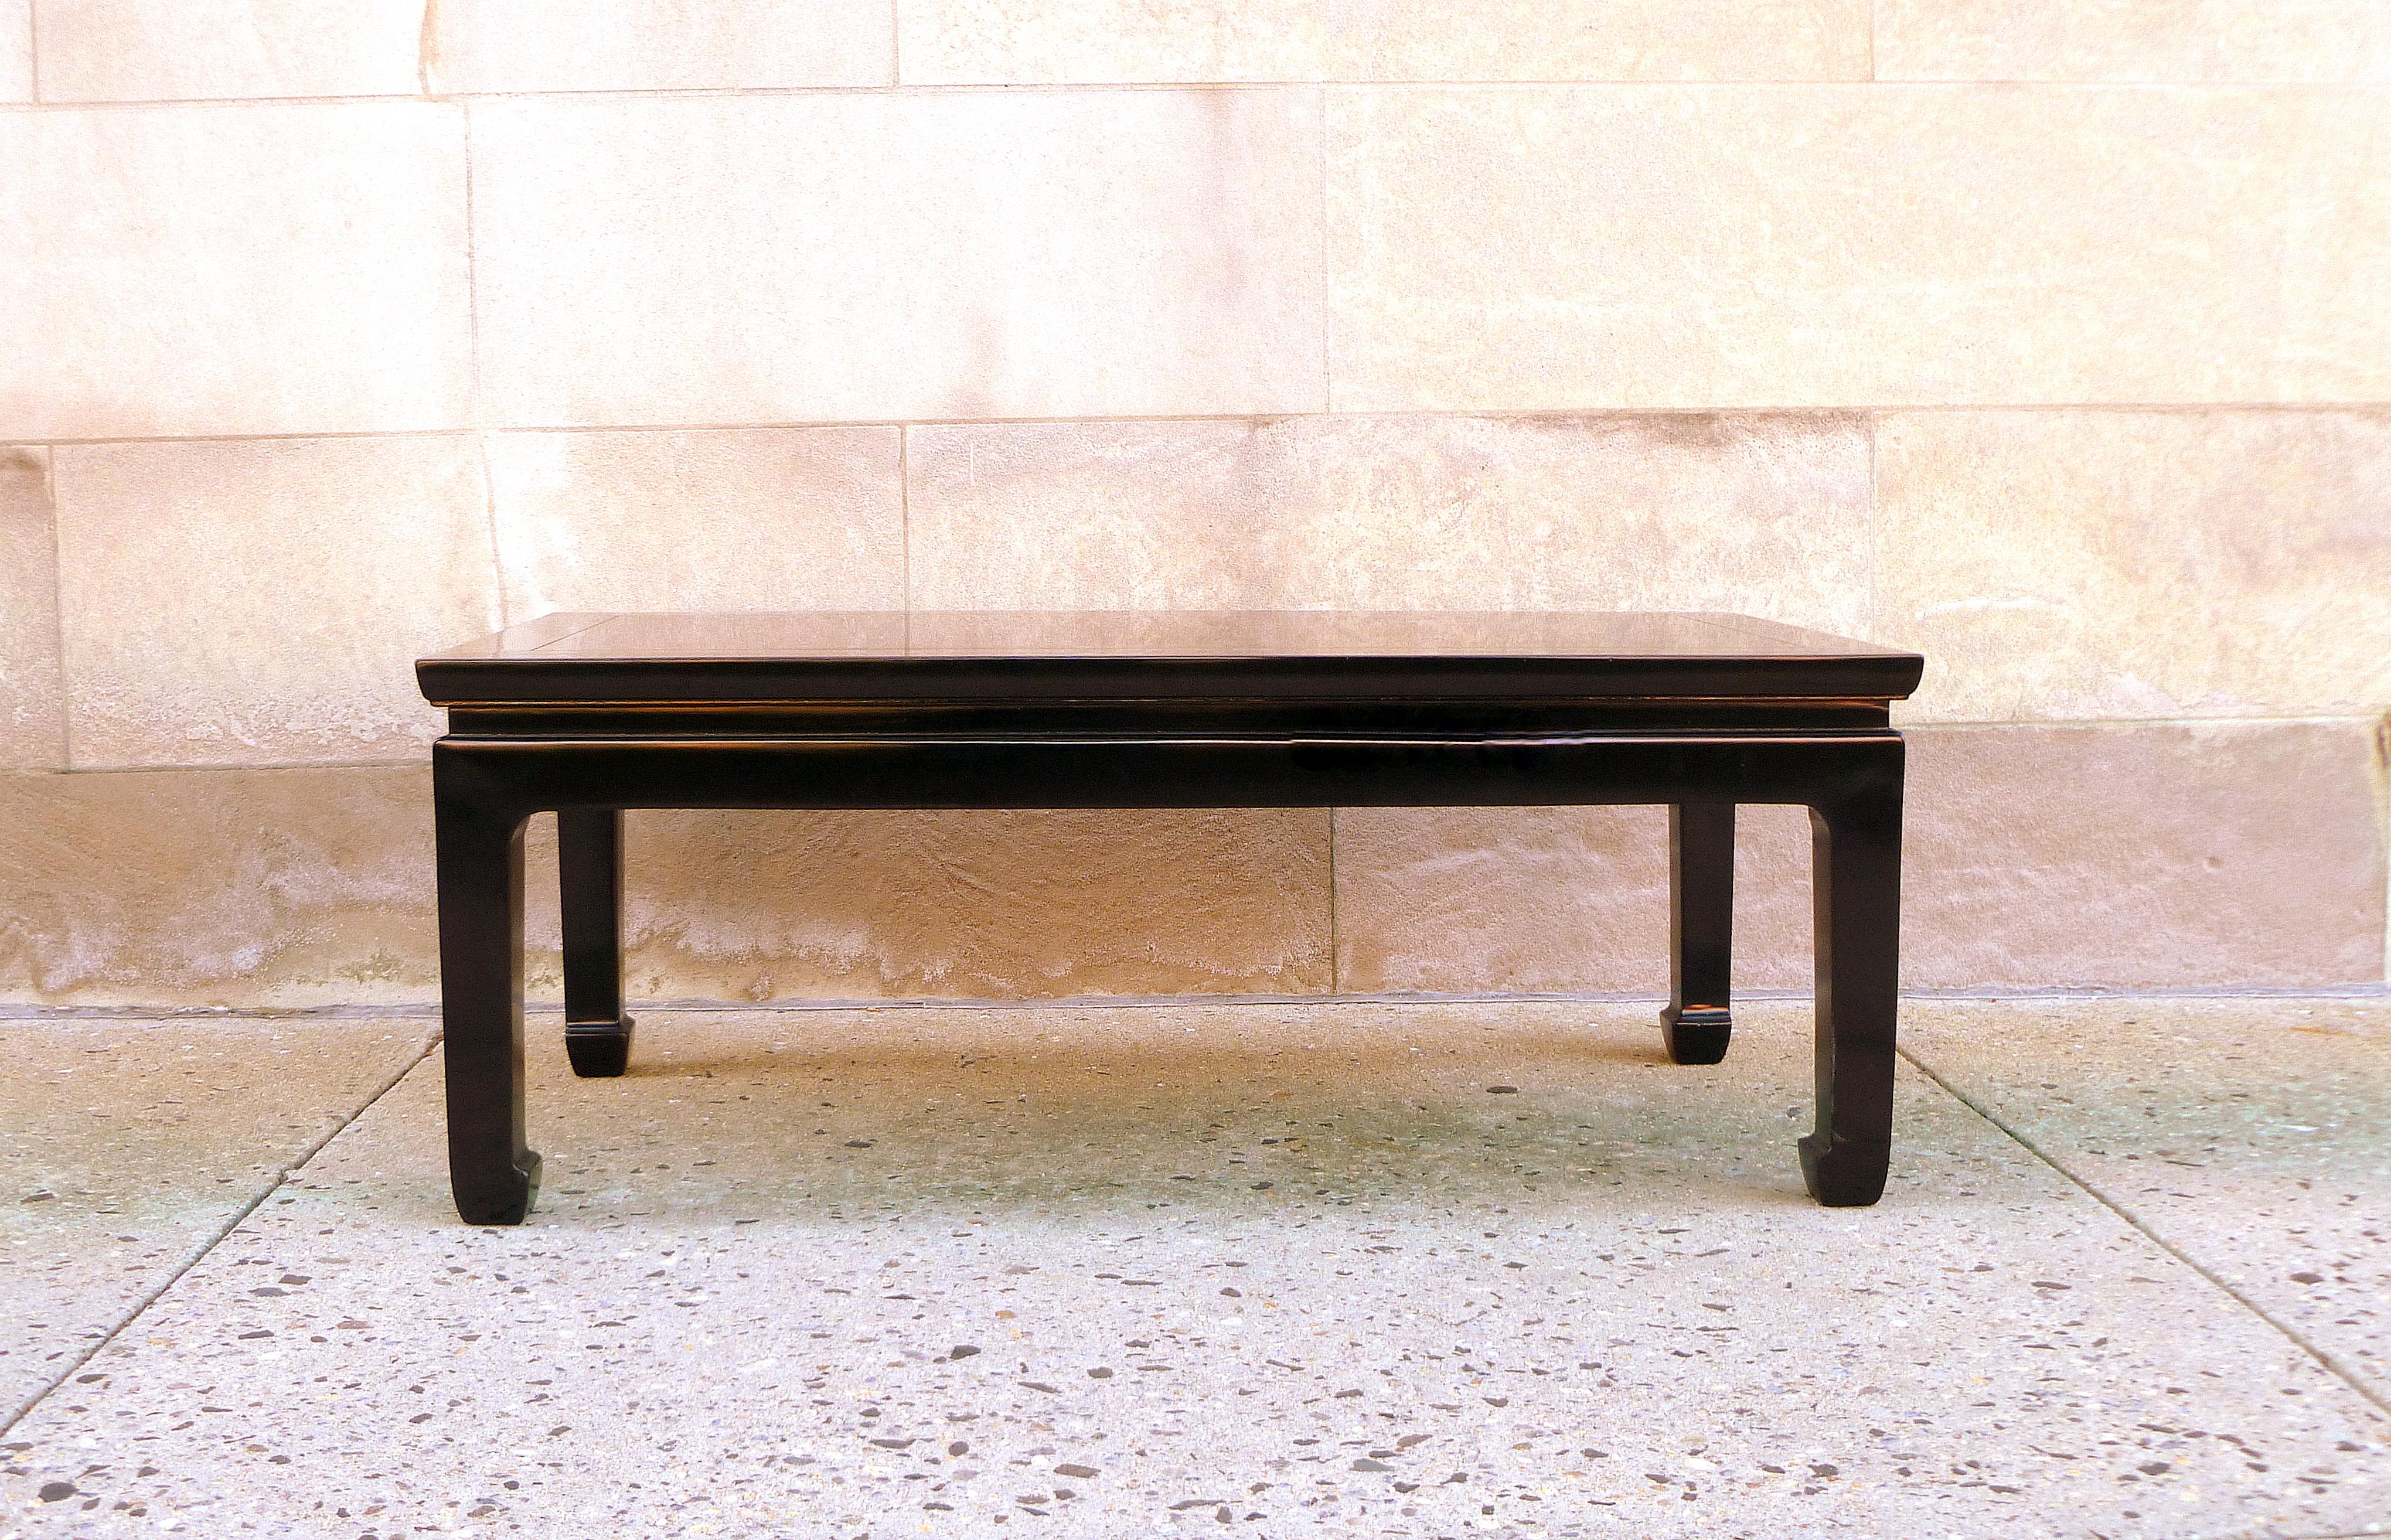 Fine black lacquer low table, simple and elegant, beautiful form and color. We carry fine quality furniture with elegant finished and has been appeared many times in 